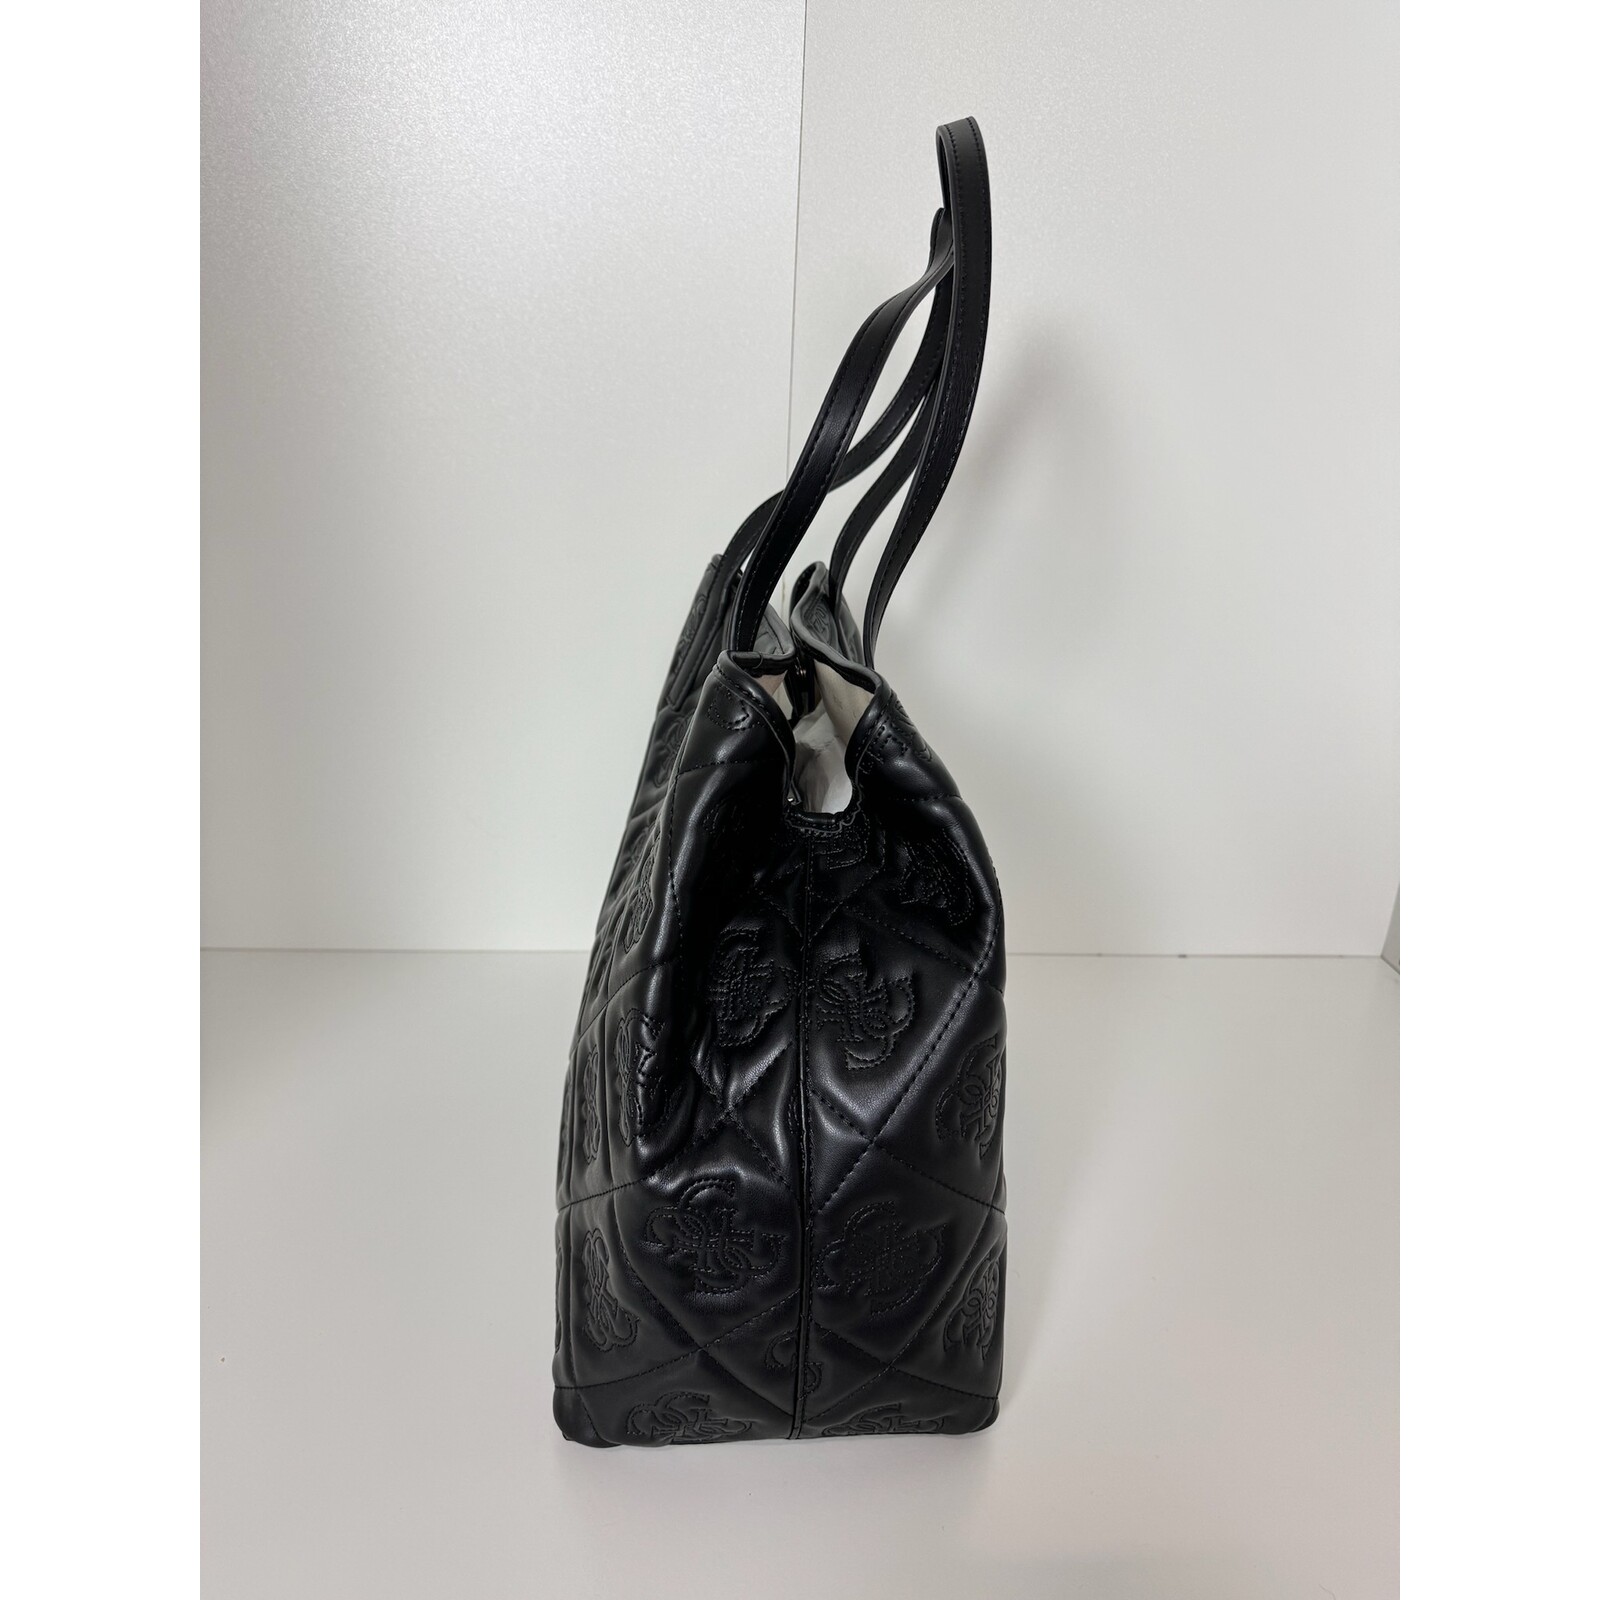 Guess 2 in 1 Bag Vikky Black Guess 824